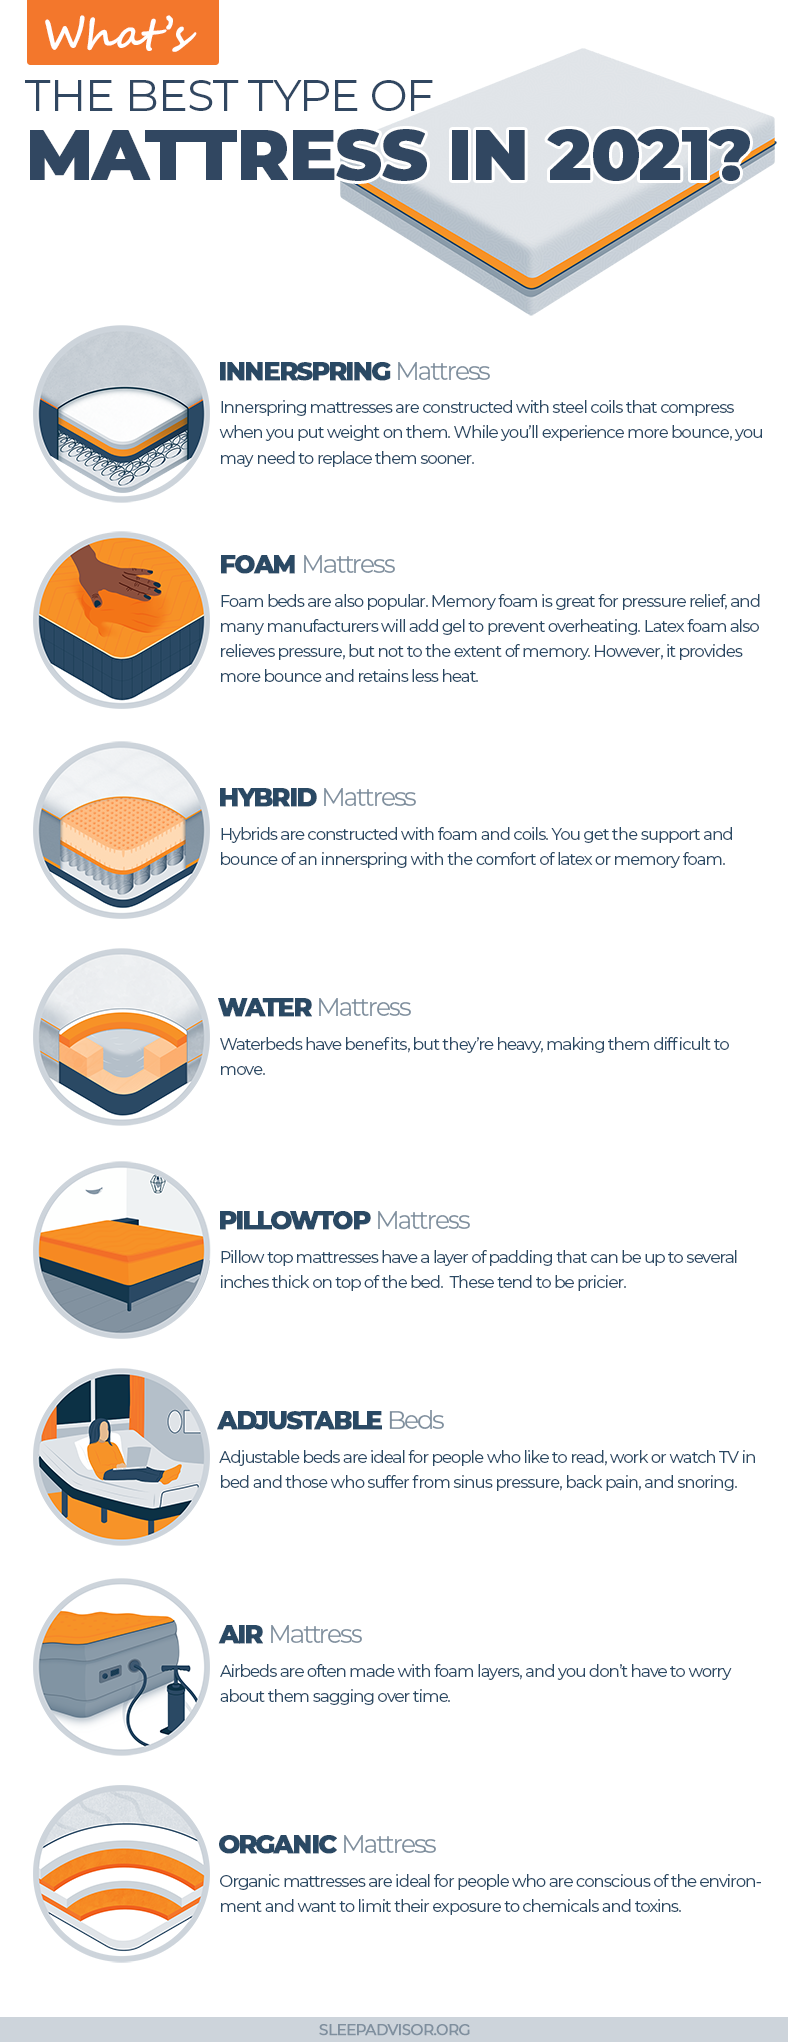 Infographic What's The Best Type of Mattress in 2021